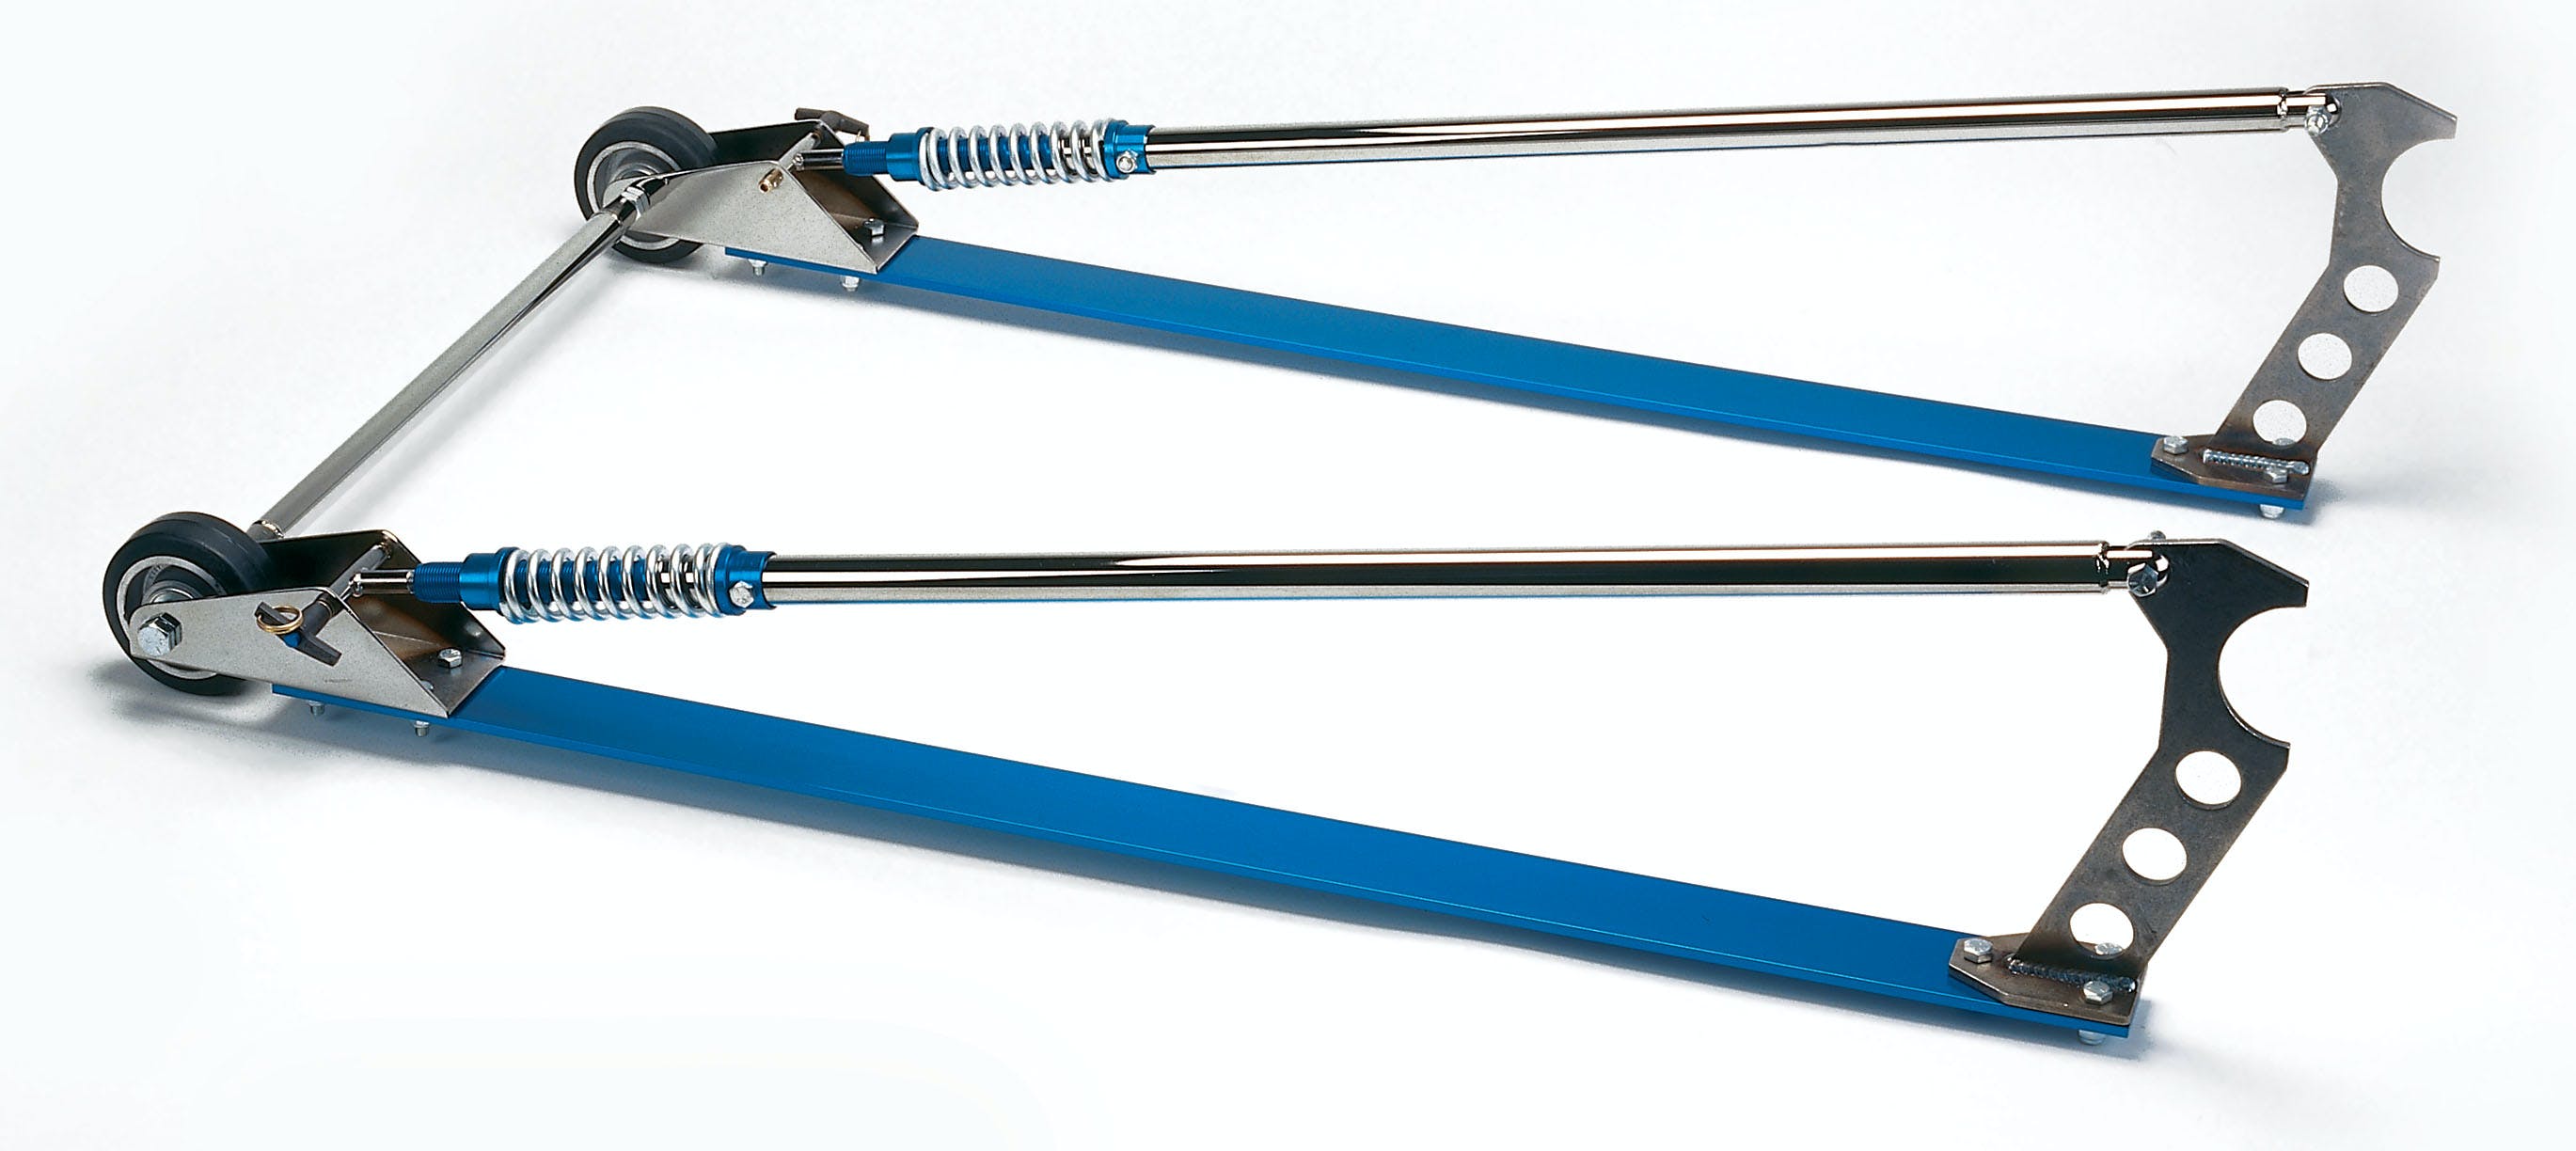 Competition Engineering C2039 Wheel-E-Bar,Chrome and Blue finish